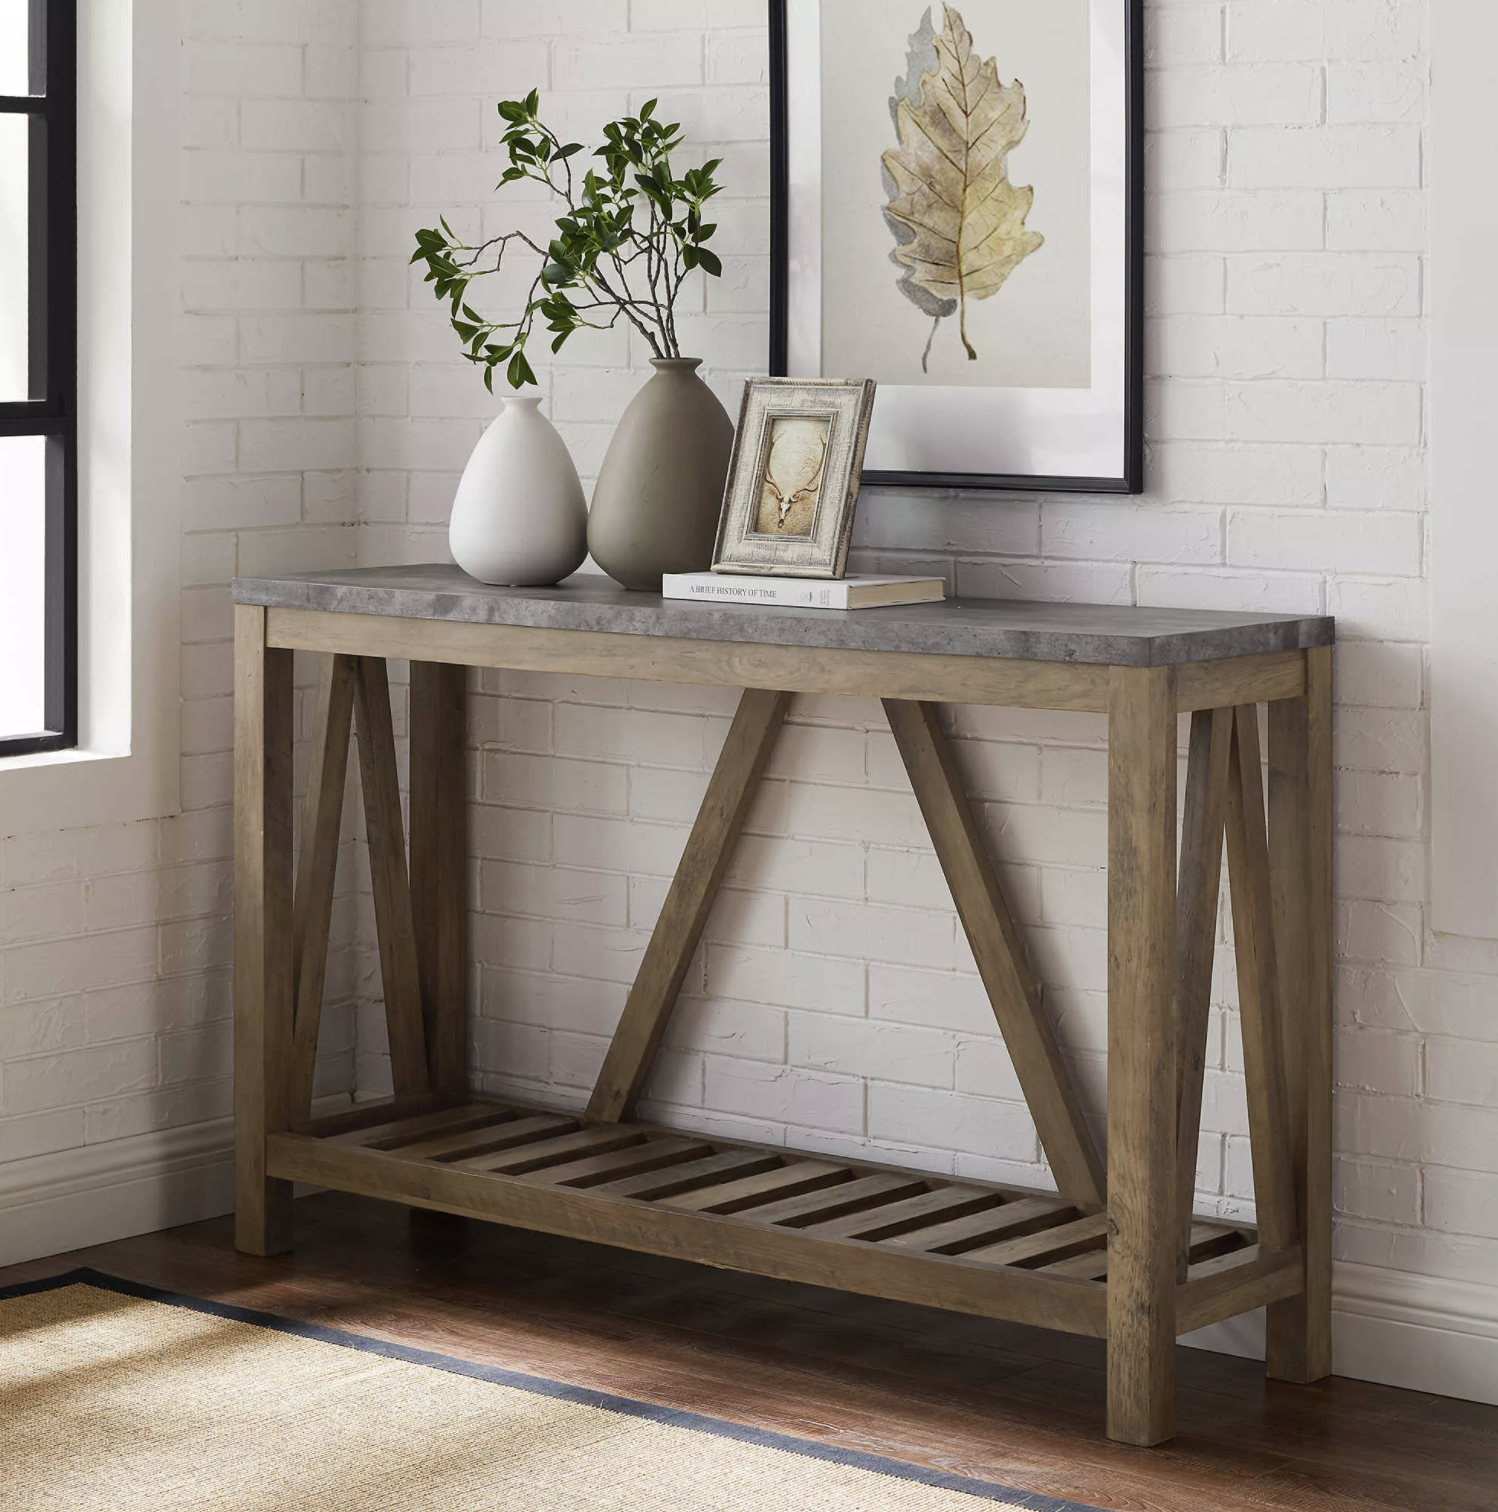 the console table in brown with decor sitting on top